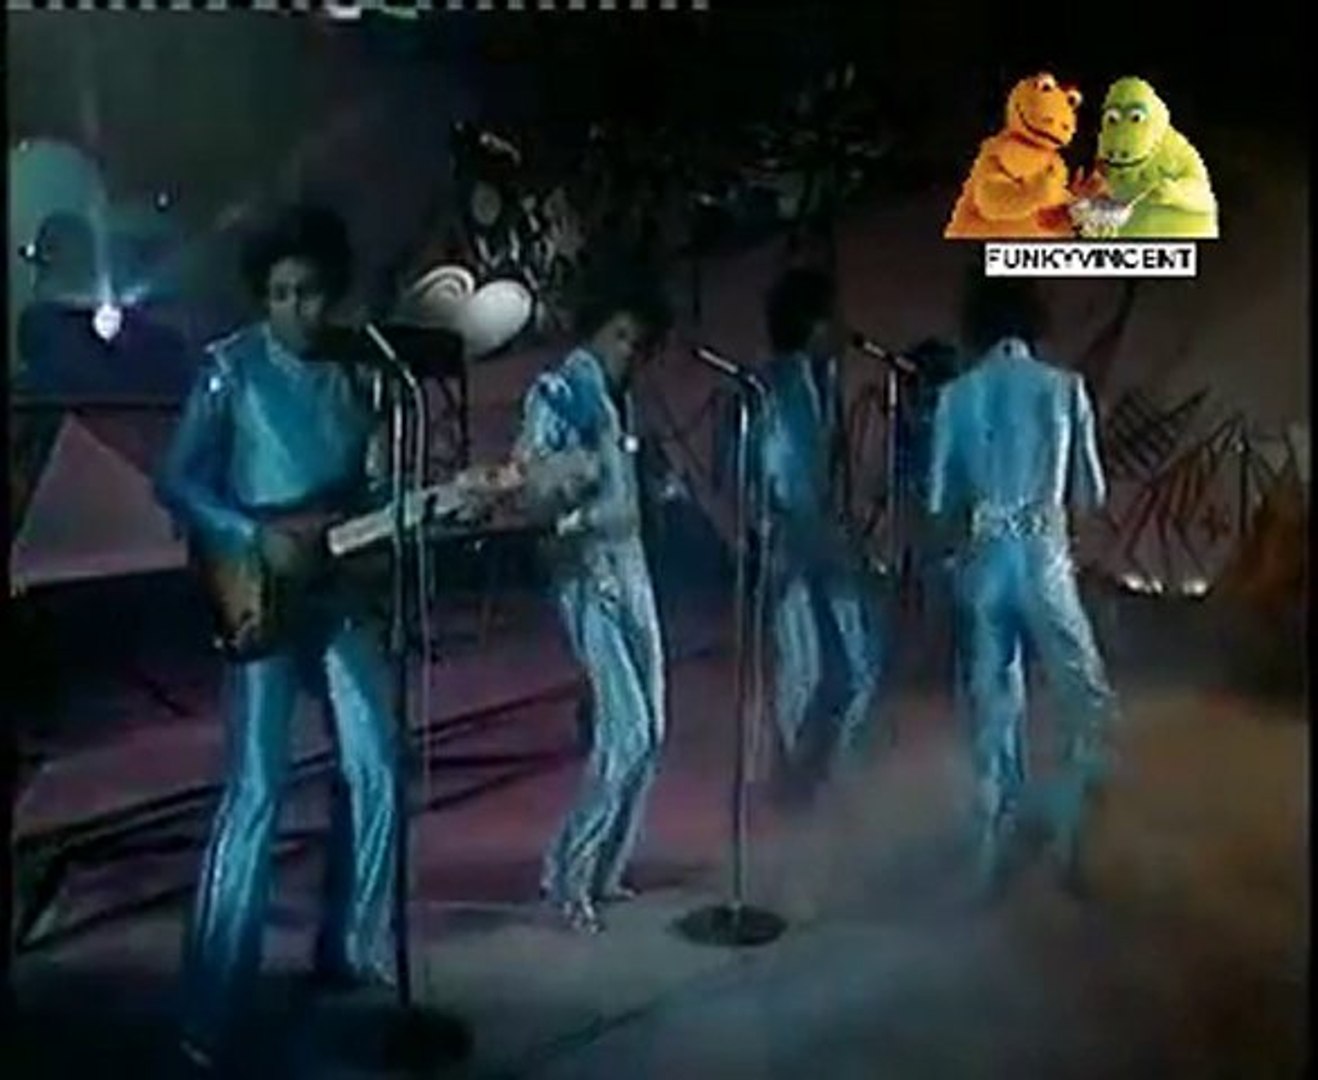 Jackson Five - shake your body down to the grownd - Vidéo Dailymotion